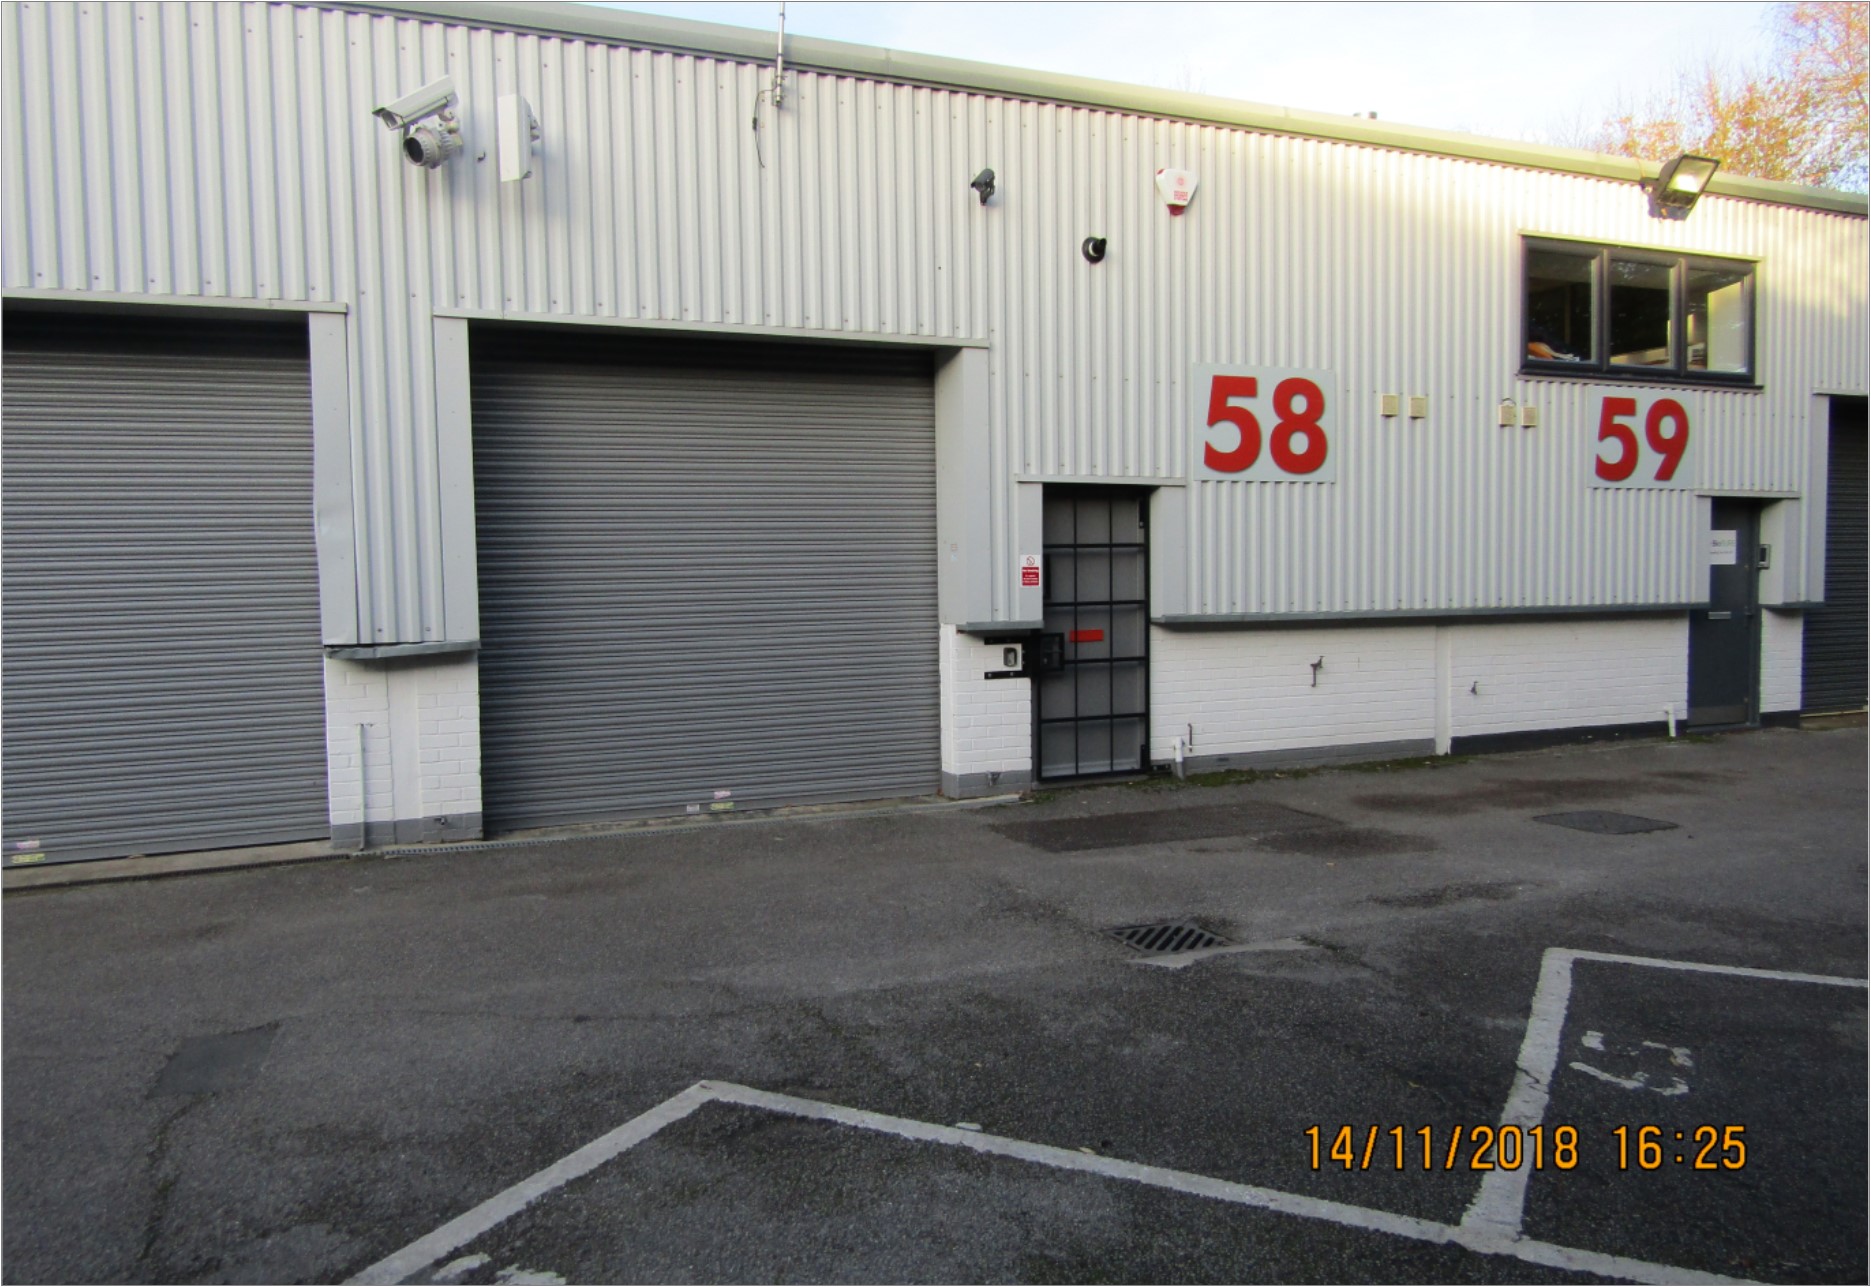 Unit 58, Hillgrove Business Park, Nazeing Road, Nazeing